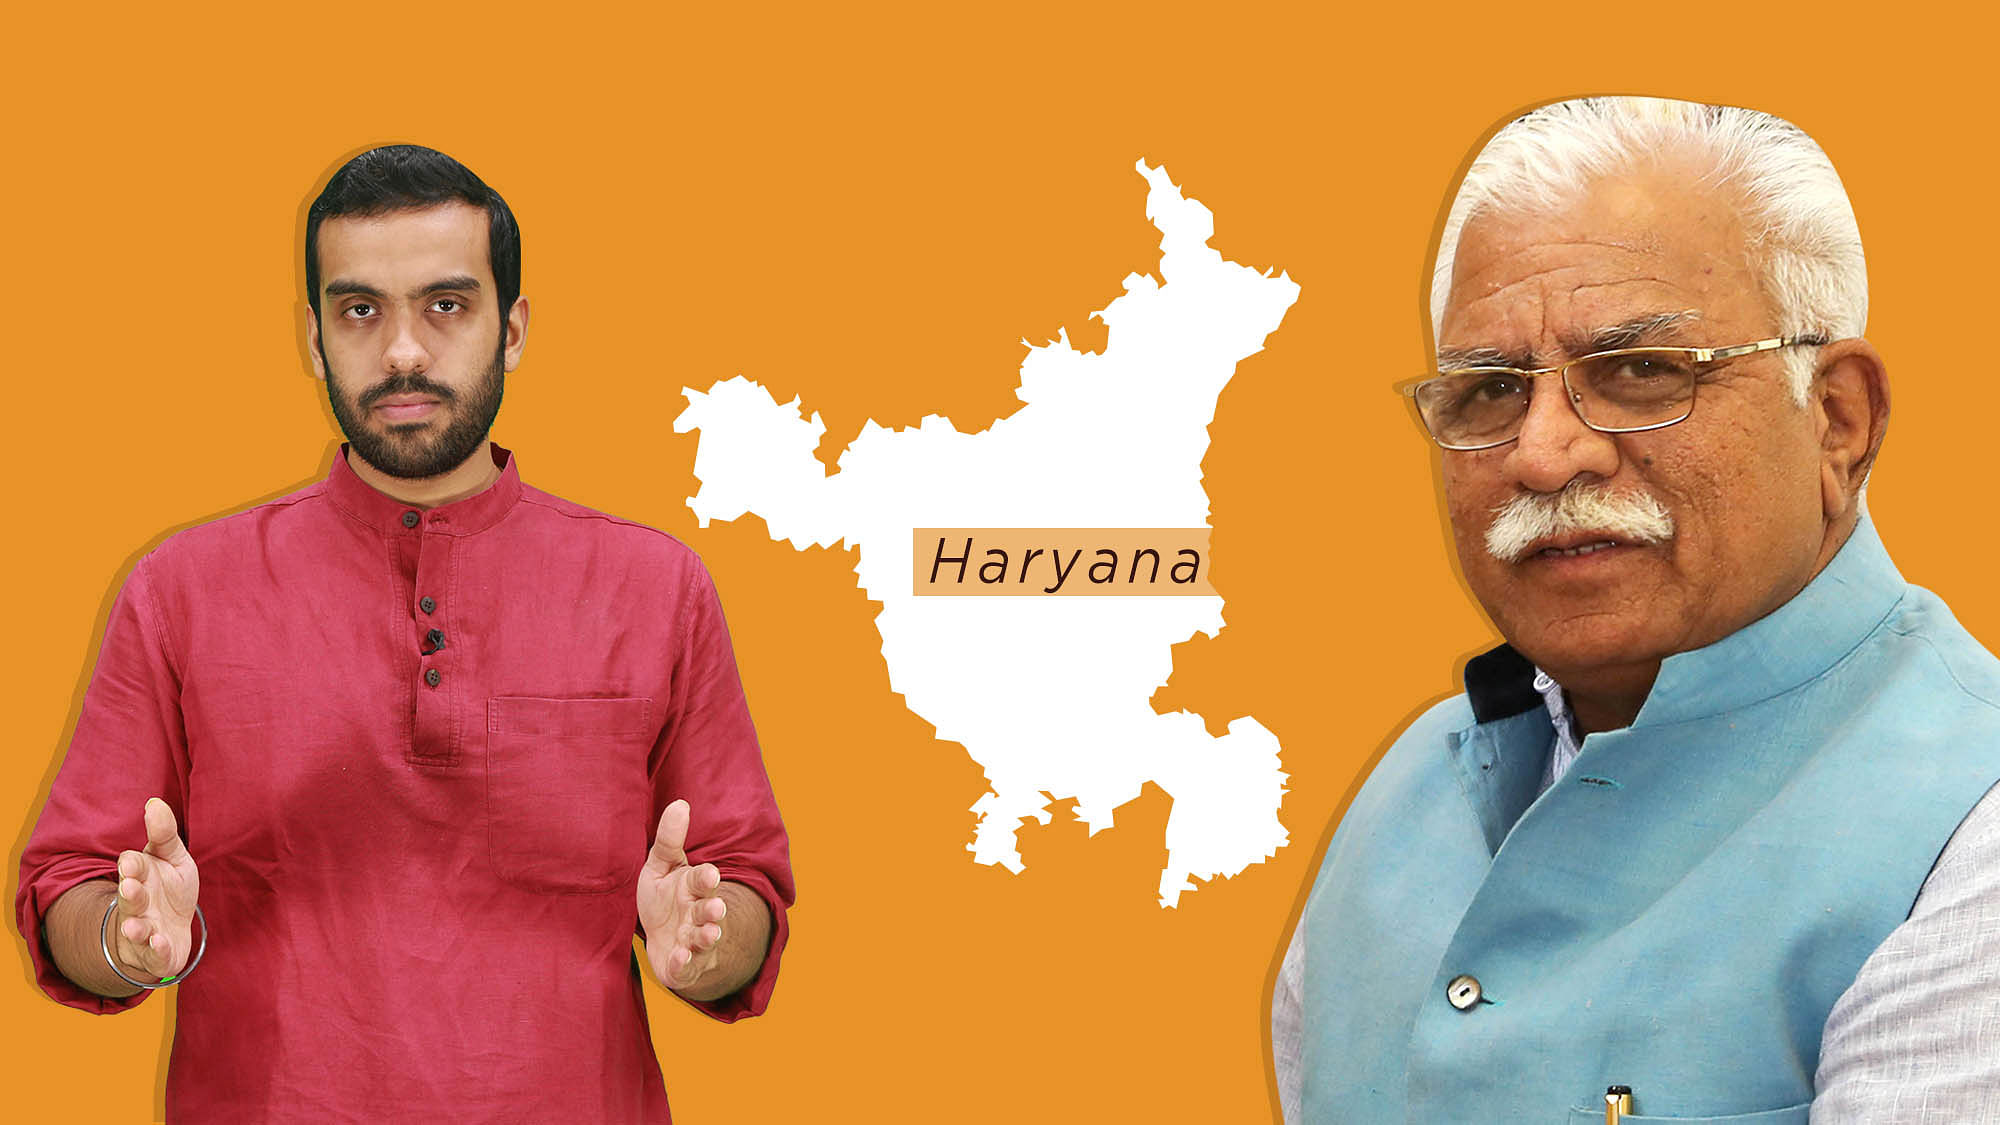 The BJP has projected current Haryana CM Manohar Lal Khattar as their chief ministerial face while Congress has caught up in internal squabbles.&nbsp;